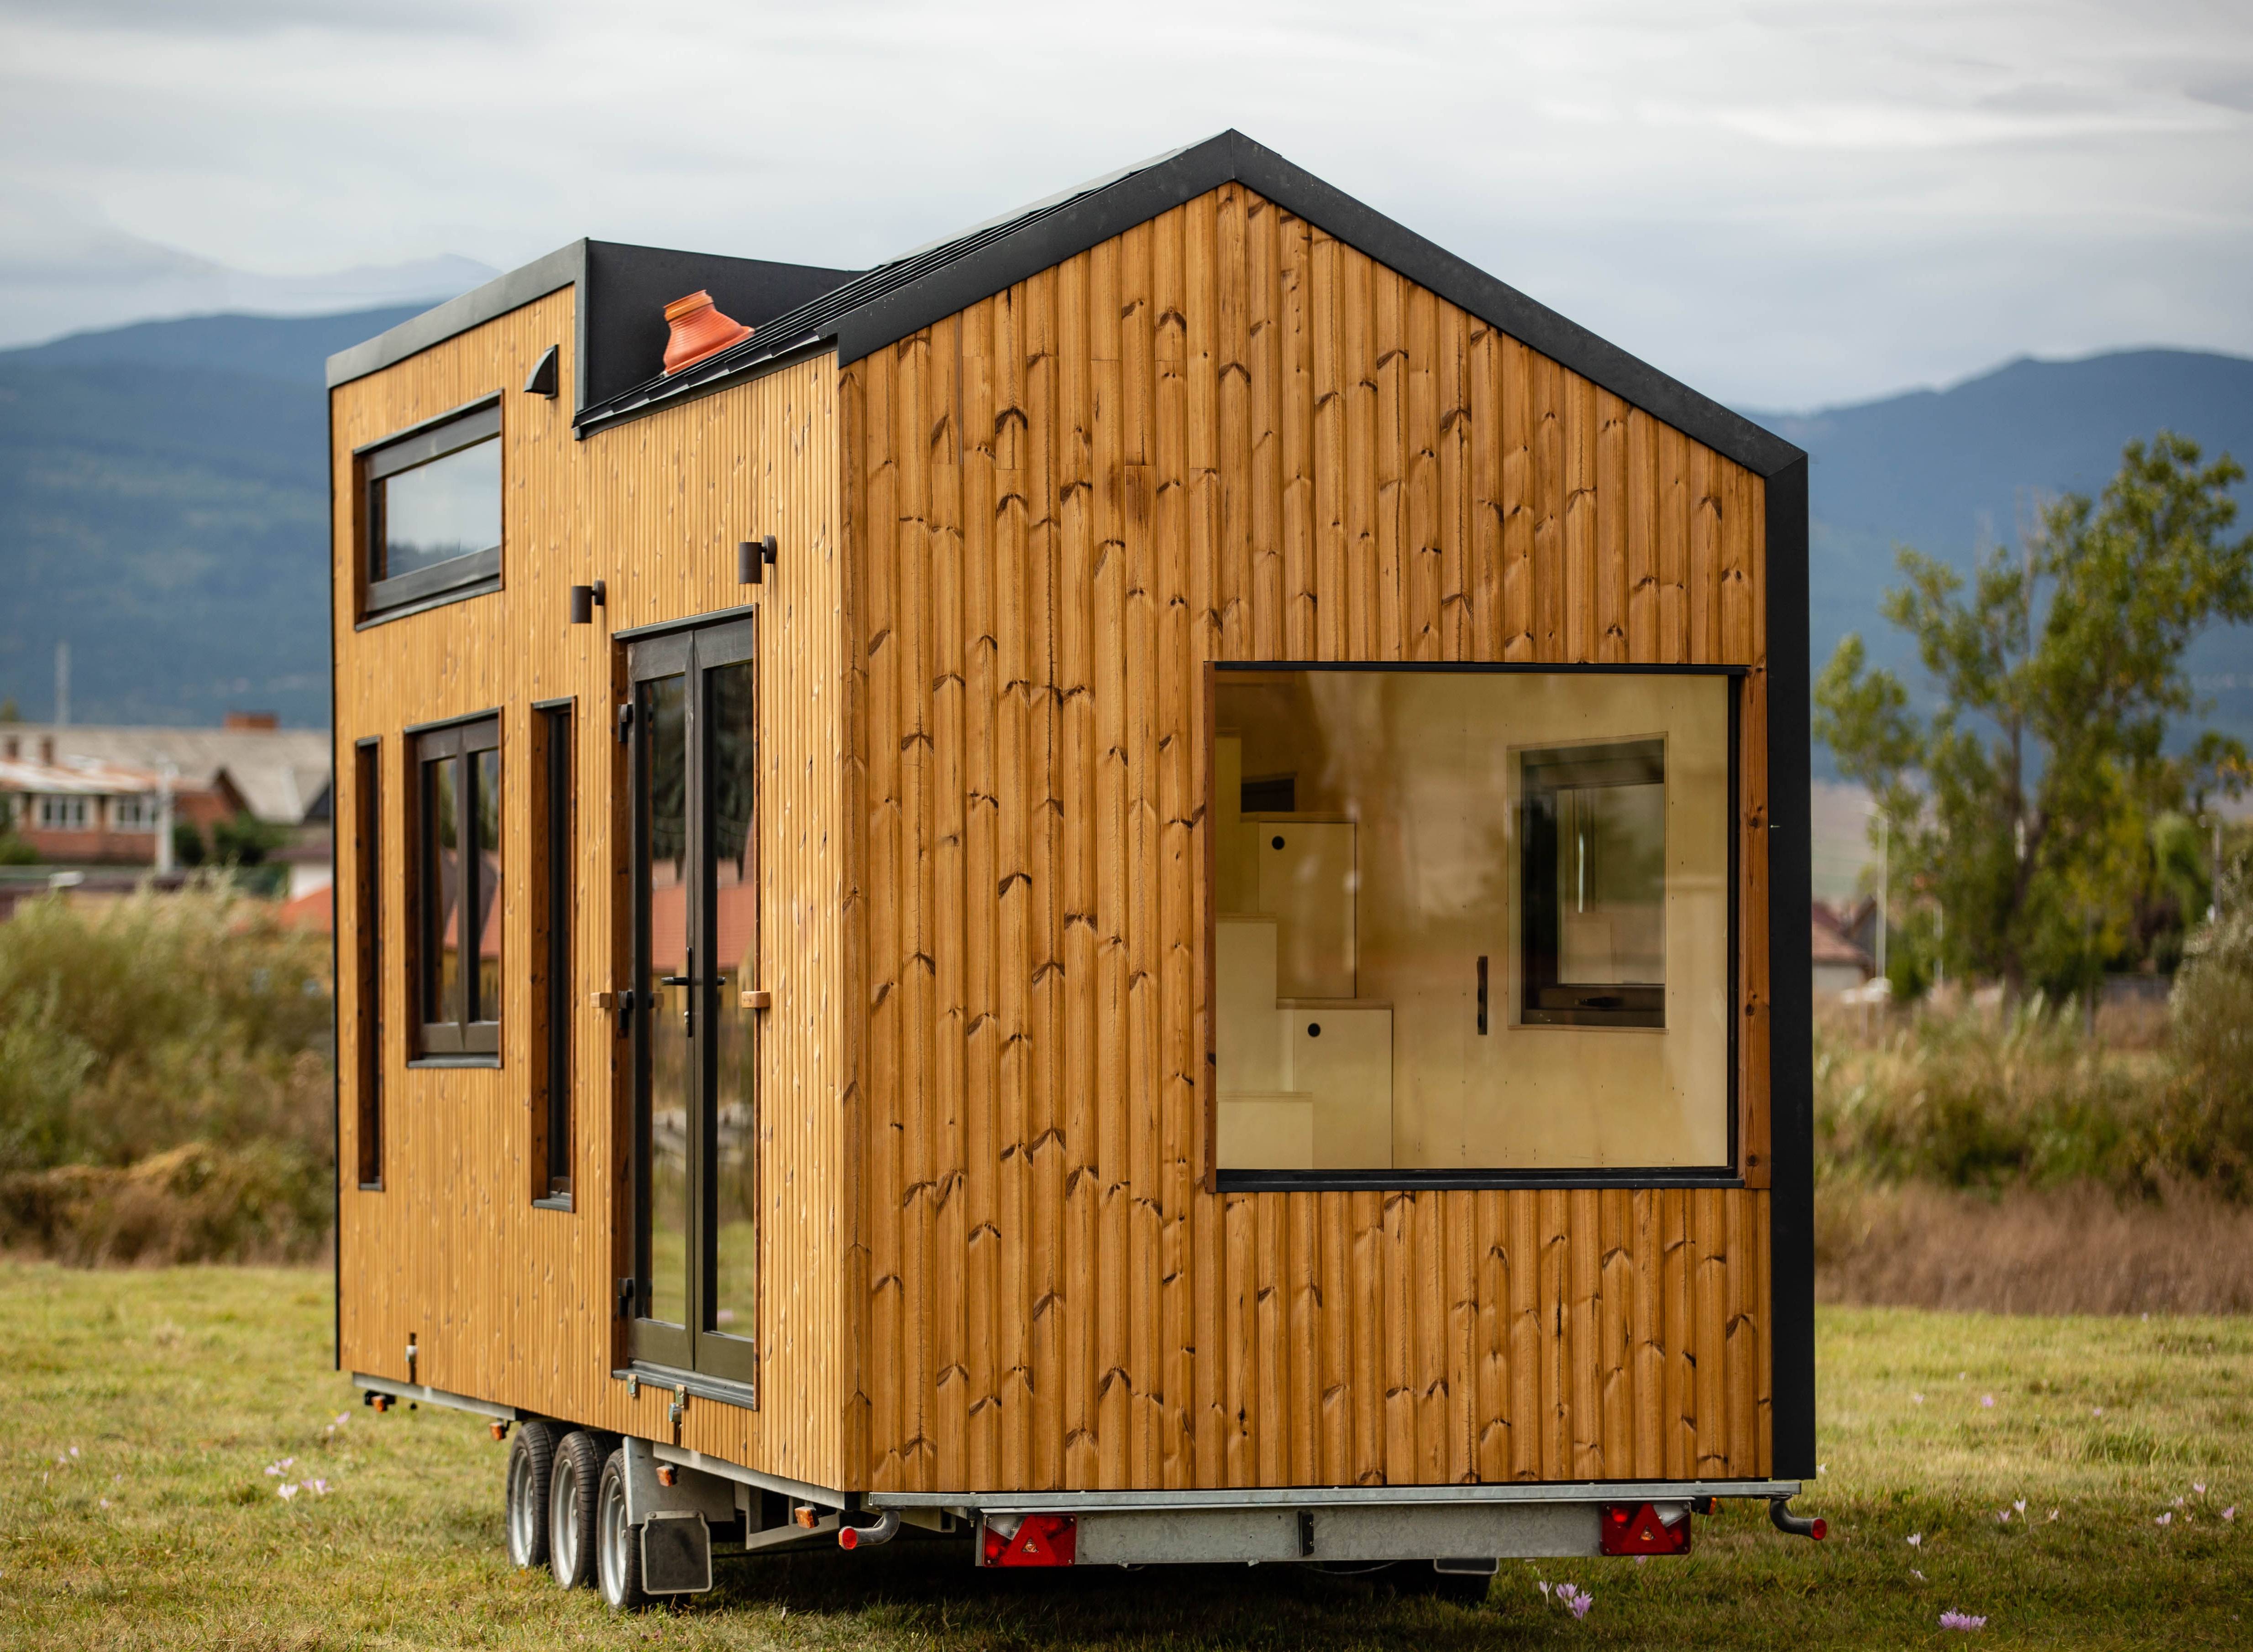 Image constructeur insolite The Tiny House